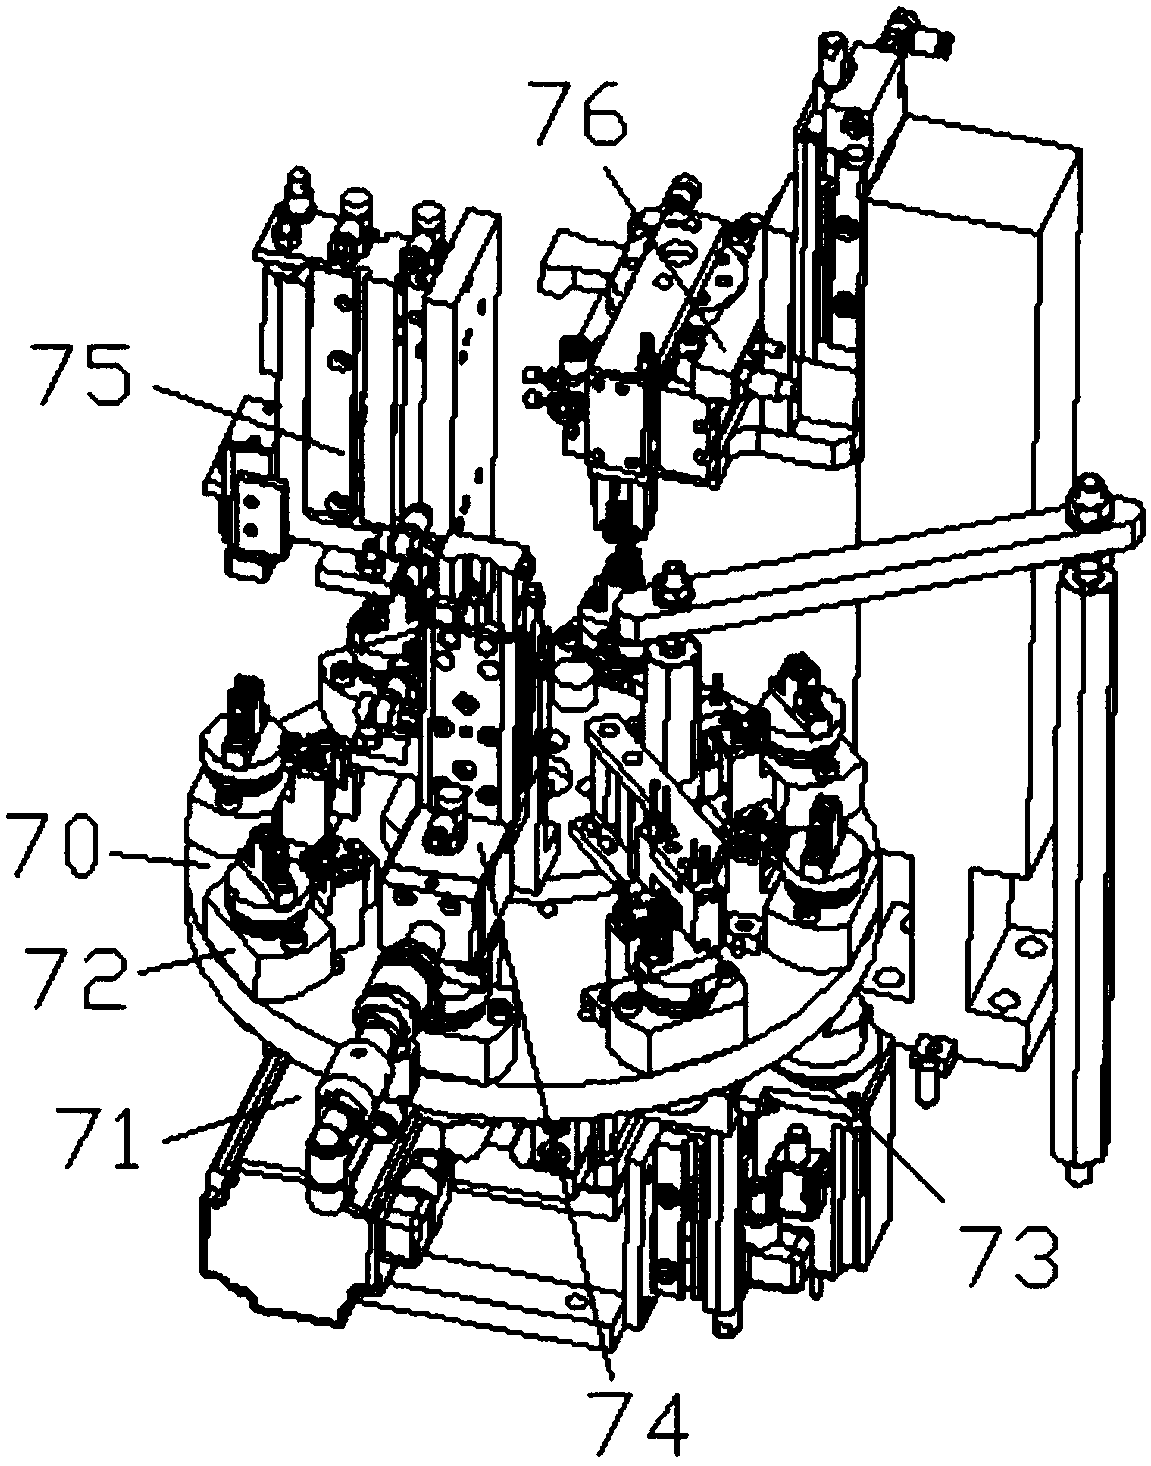 Locking plate assembling machine for connector